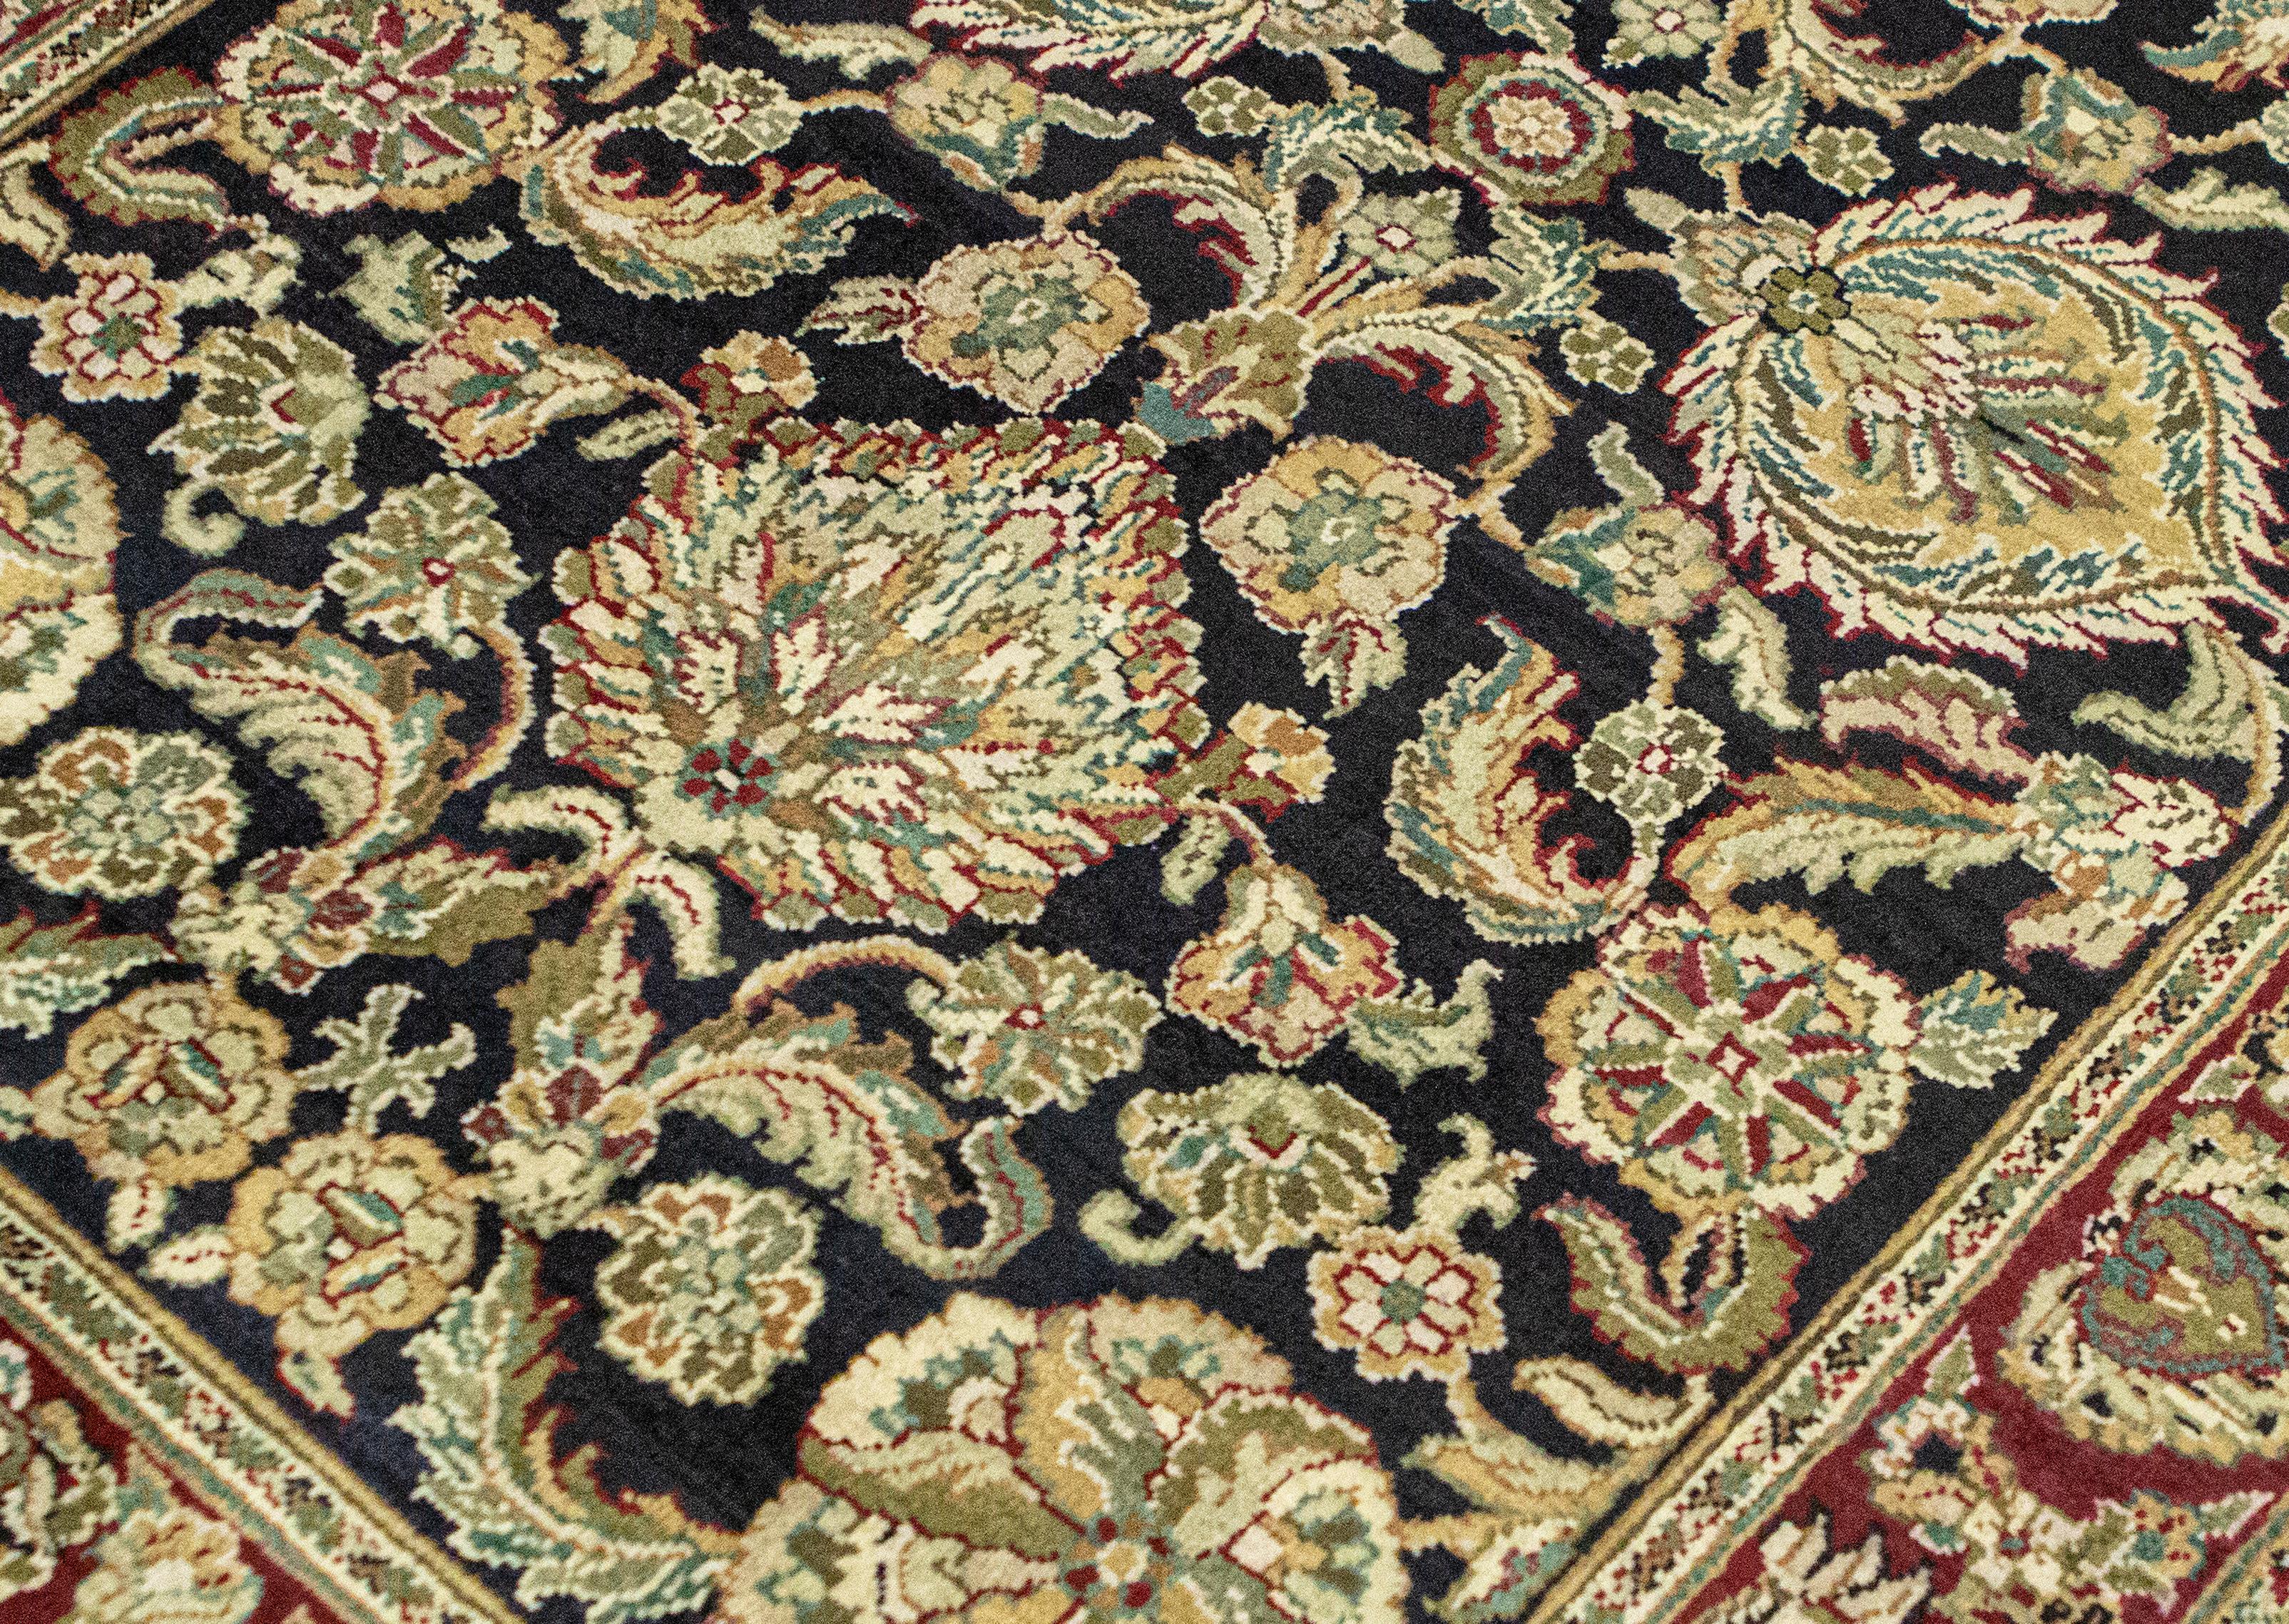 The inspiration for this collection comes from 16th century Indian carpet weavers, who created the most beautiful carpets for the Royal Courts of the Mogul Emperors. Based on authentic Oriental designs and handwoven in the traditional style.